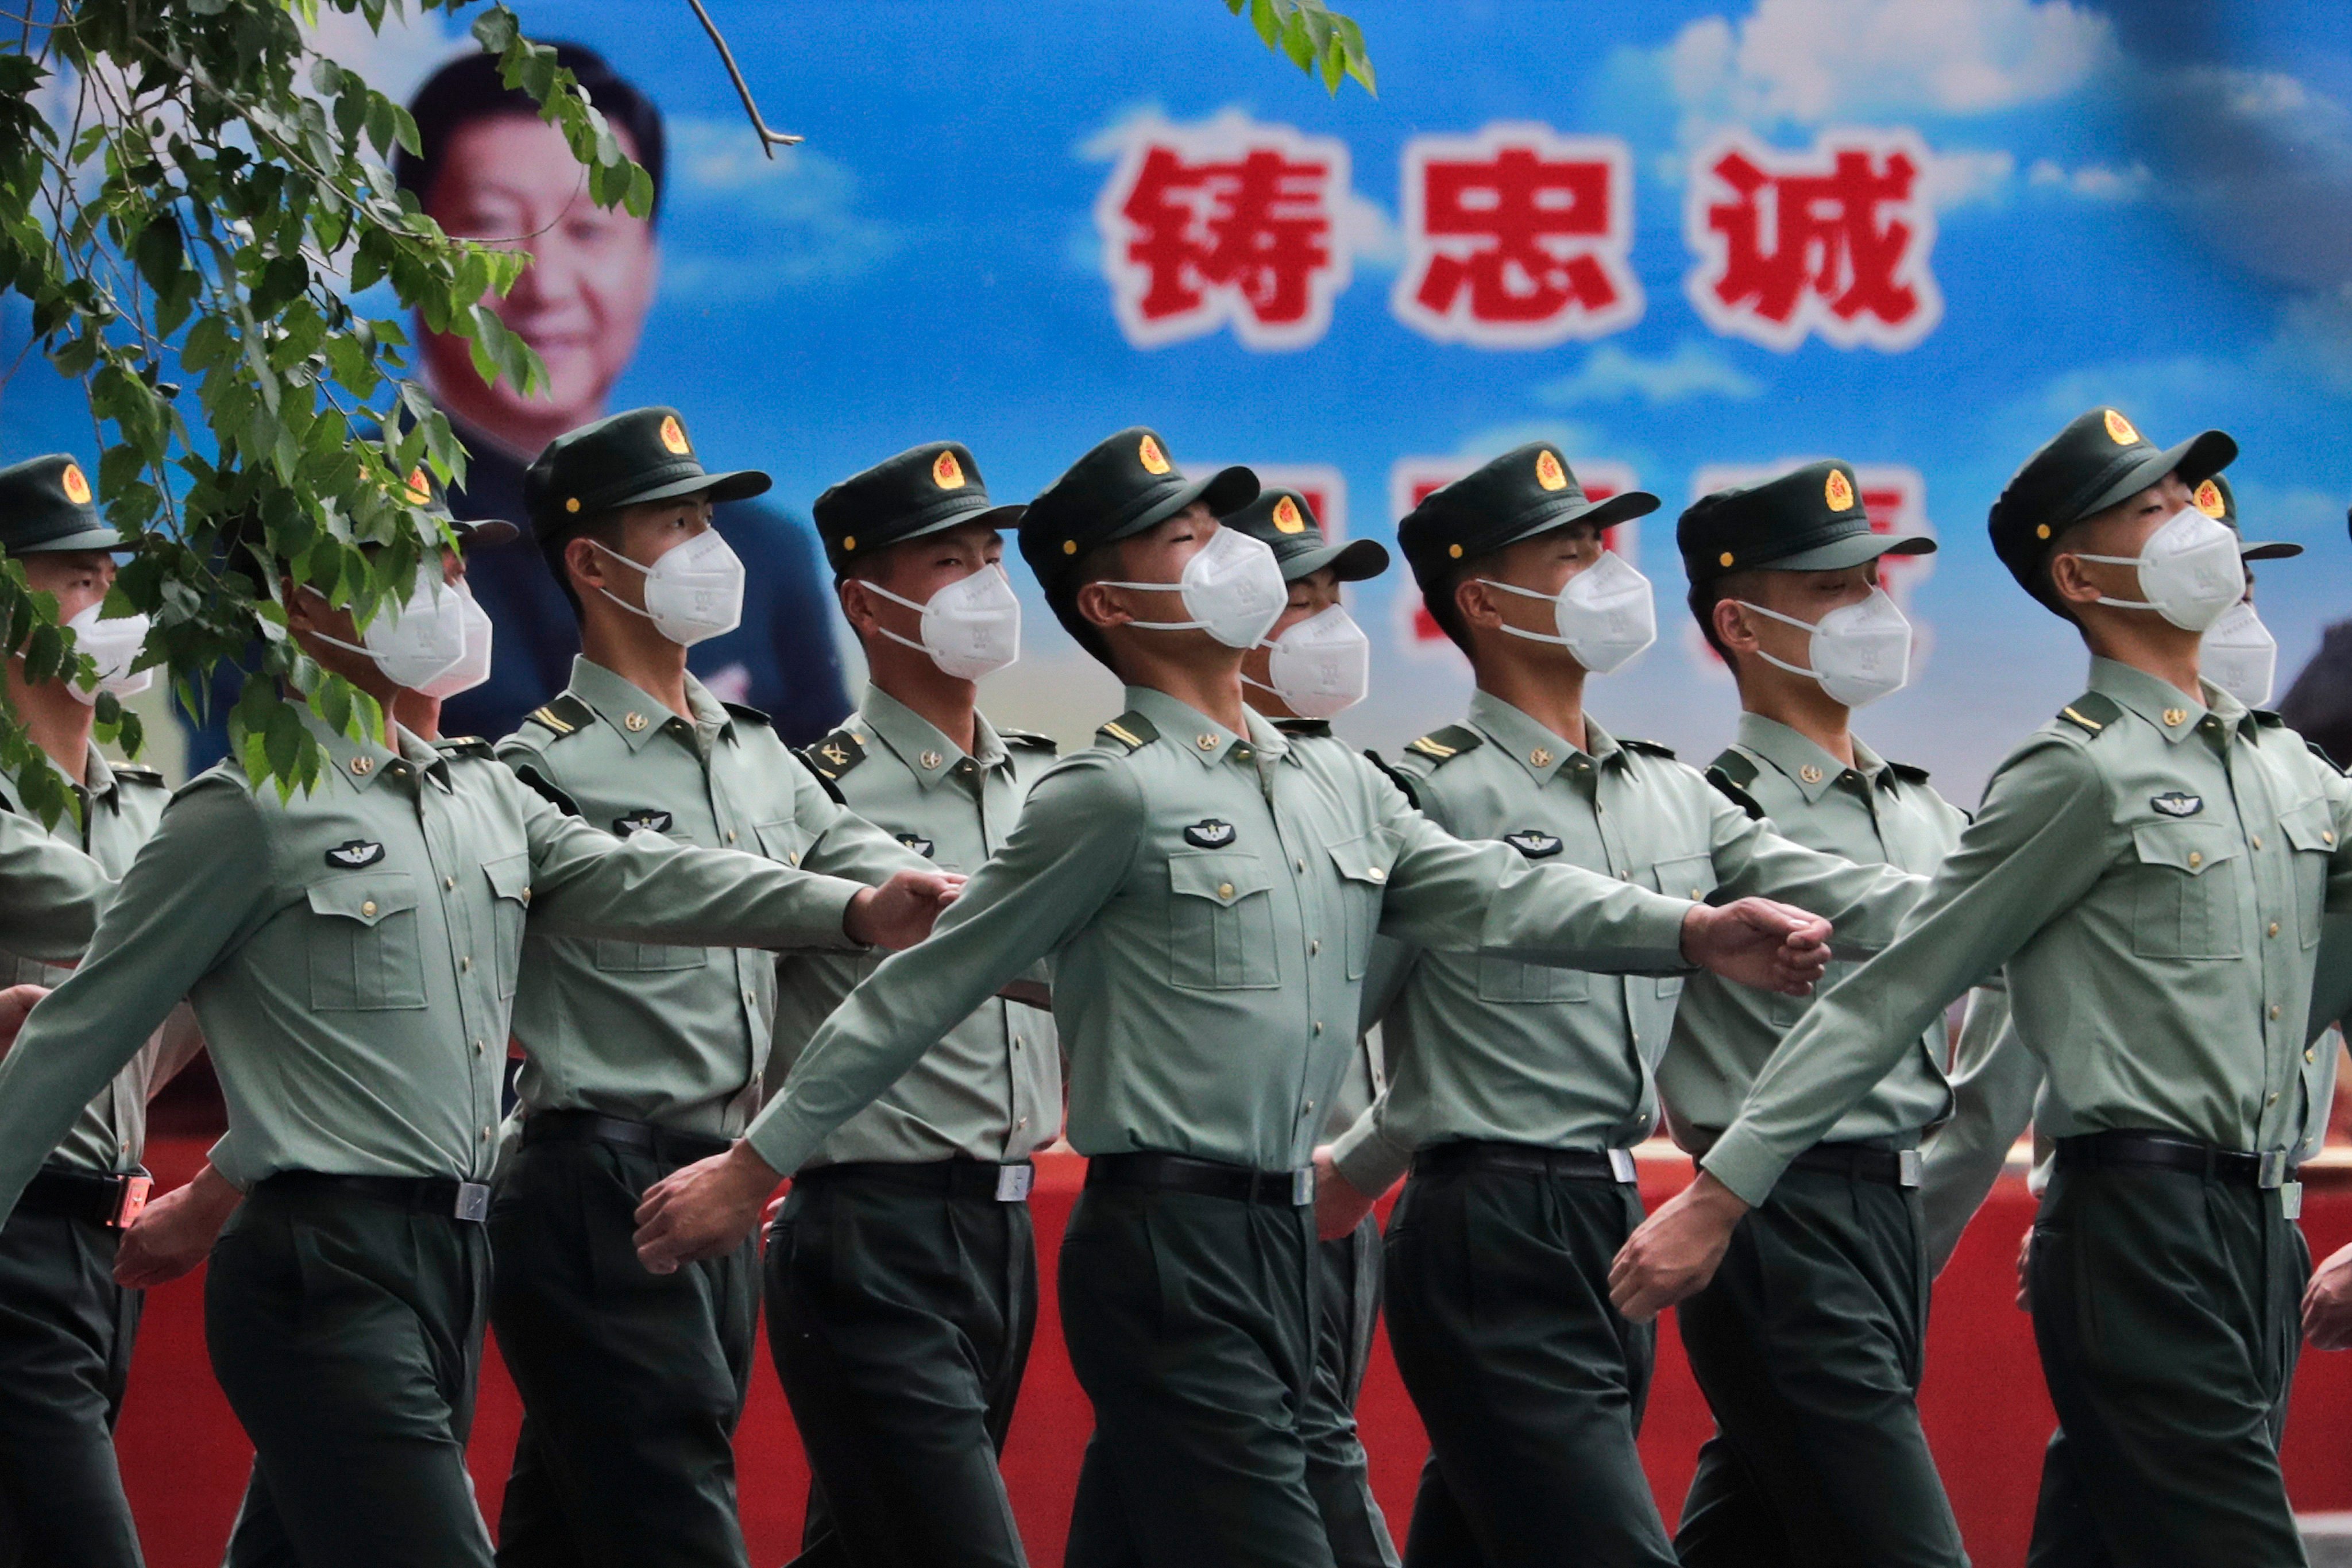 China has not said if any serving troops have been infected in the latest Covid-19 wave, but a PLA Daily commentary said the military needs to put its own pandemic control measures in place before training is affected. Photo: AP